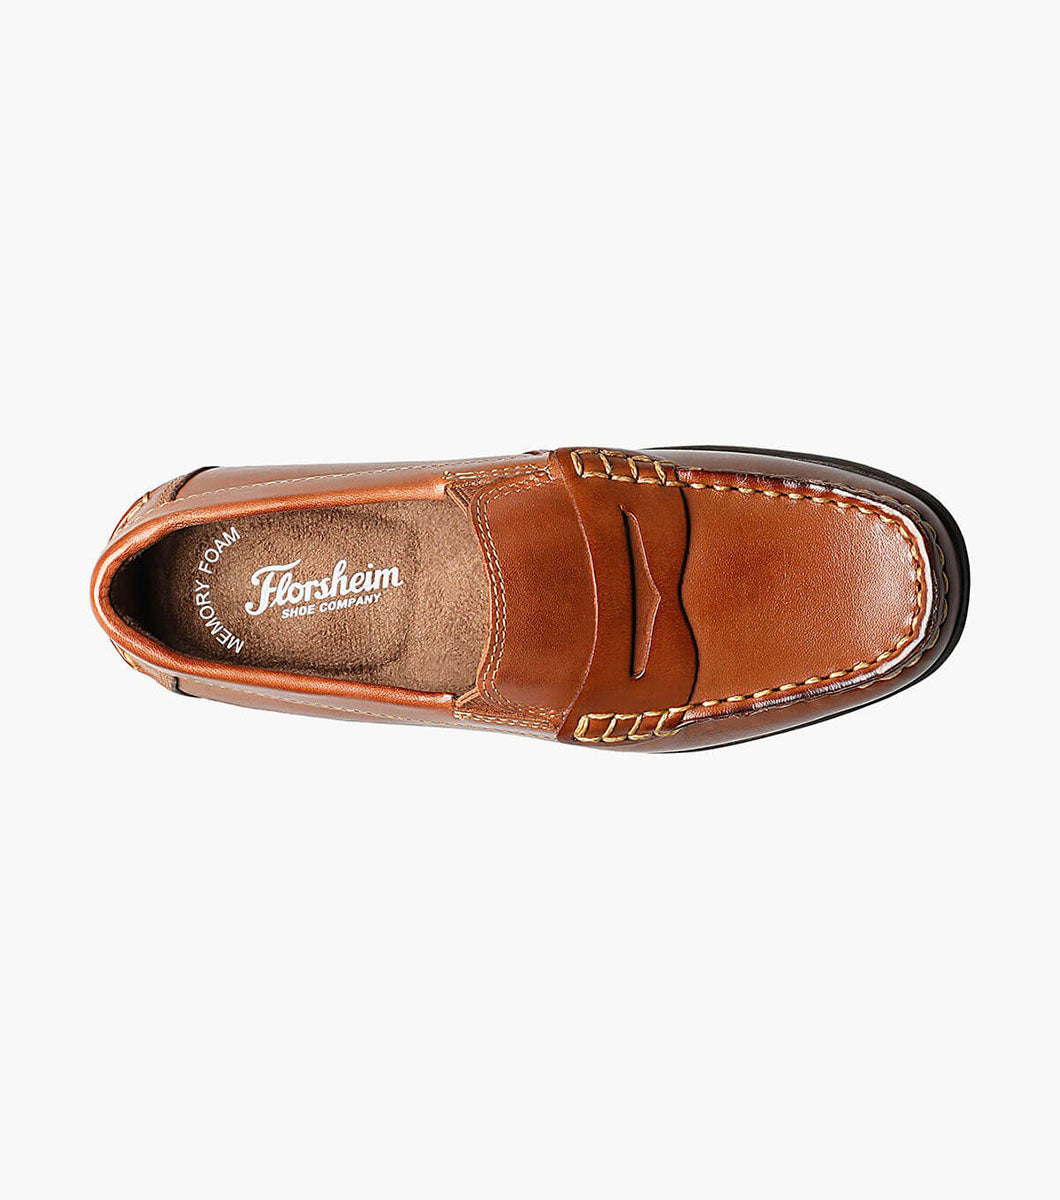 Clean and modern, the Florsheim Jasper Moc Toe Penny Driver, Jr. looks just like dad’s favorite pair of mocs. With its handsewn upper and fully cushioned footbed, this versatile driver will put him in the fashion fast lane and at the forefront of comfort.